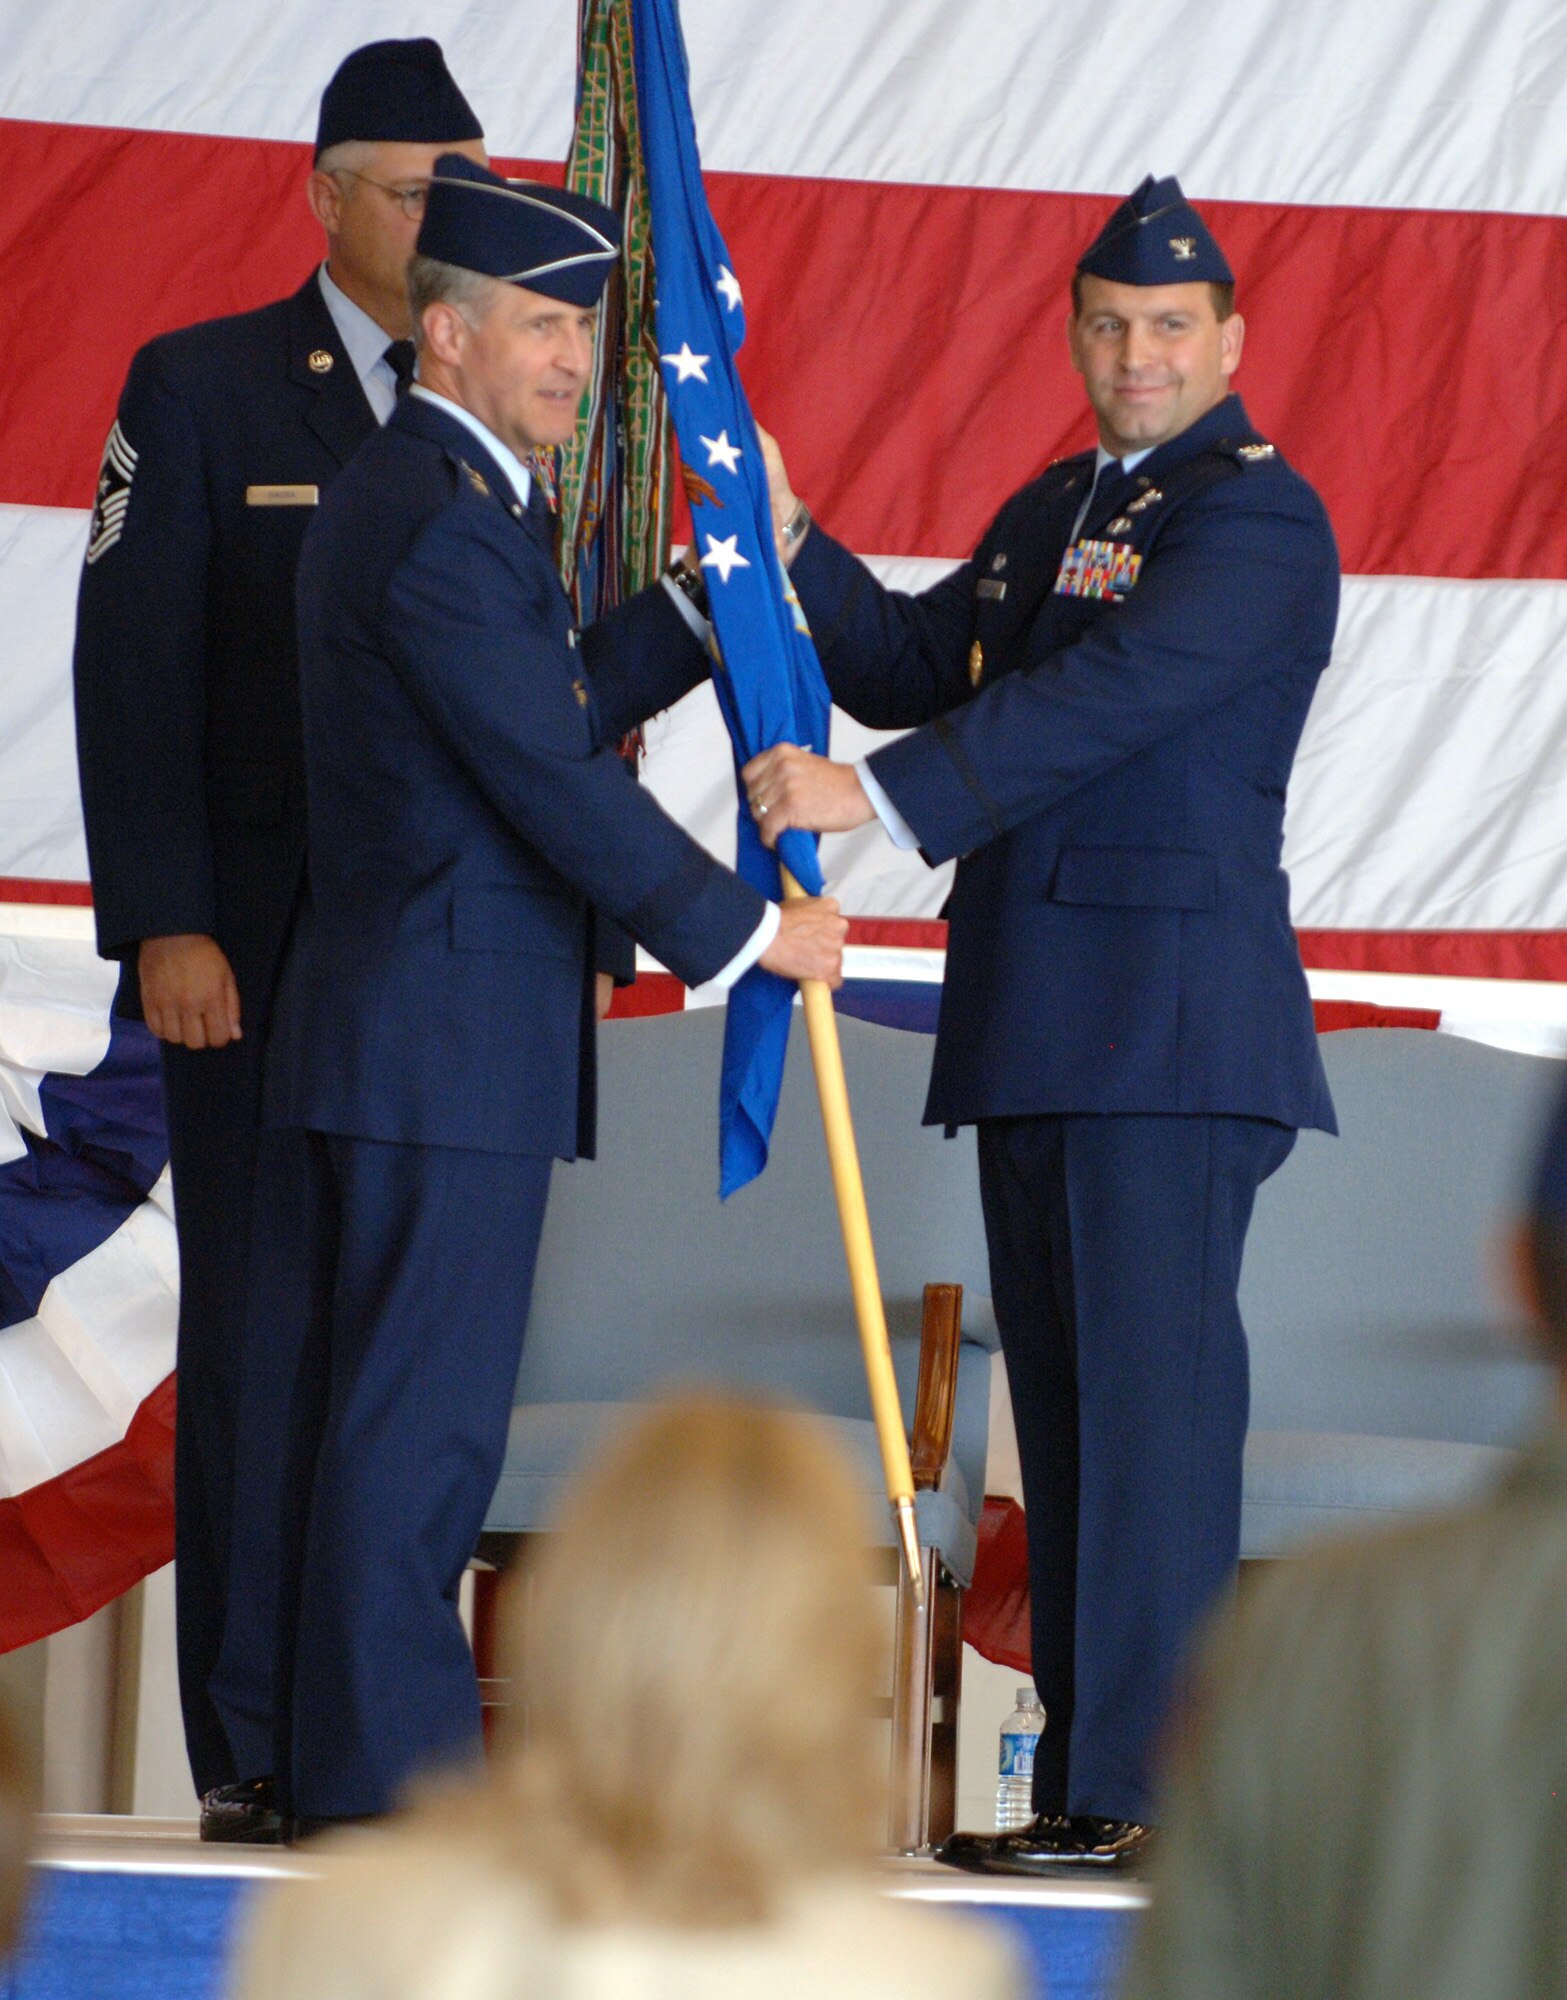 FAIRCHILD AIR FORCE BASE, Wash. – Col. Thomas Sharpy (right) assumes command of the 92nd Air Refueling Wing at a ceremony here May 22, with Maj. Gen. James Hawkins presiding. Colonel Sharpy was previously the 60th Air Mobility Wing vice commander at Travis Air Force Base, Calif. (U.S. Air Force photo/Senior Airman Chad Watkins)